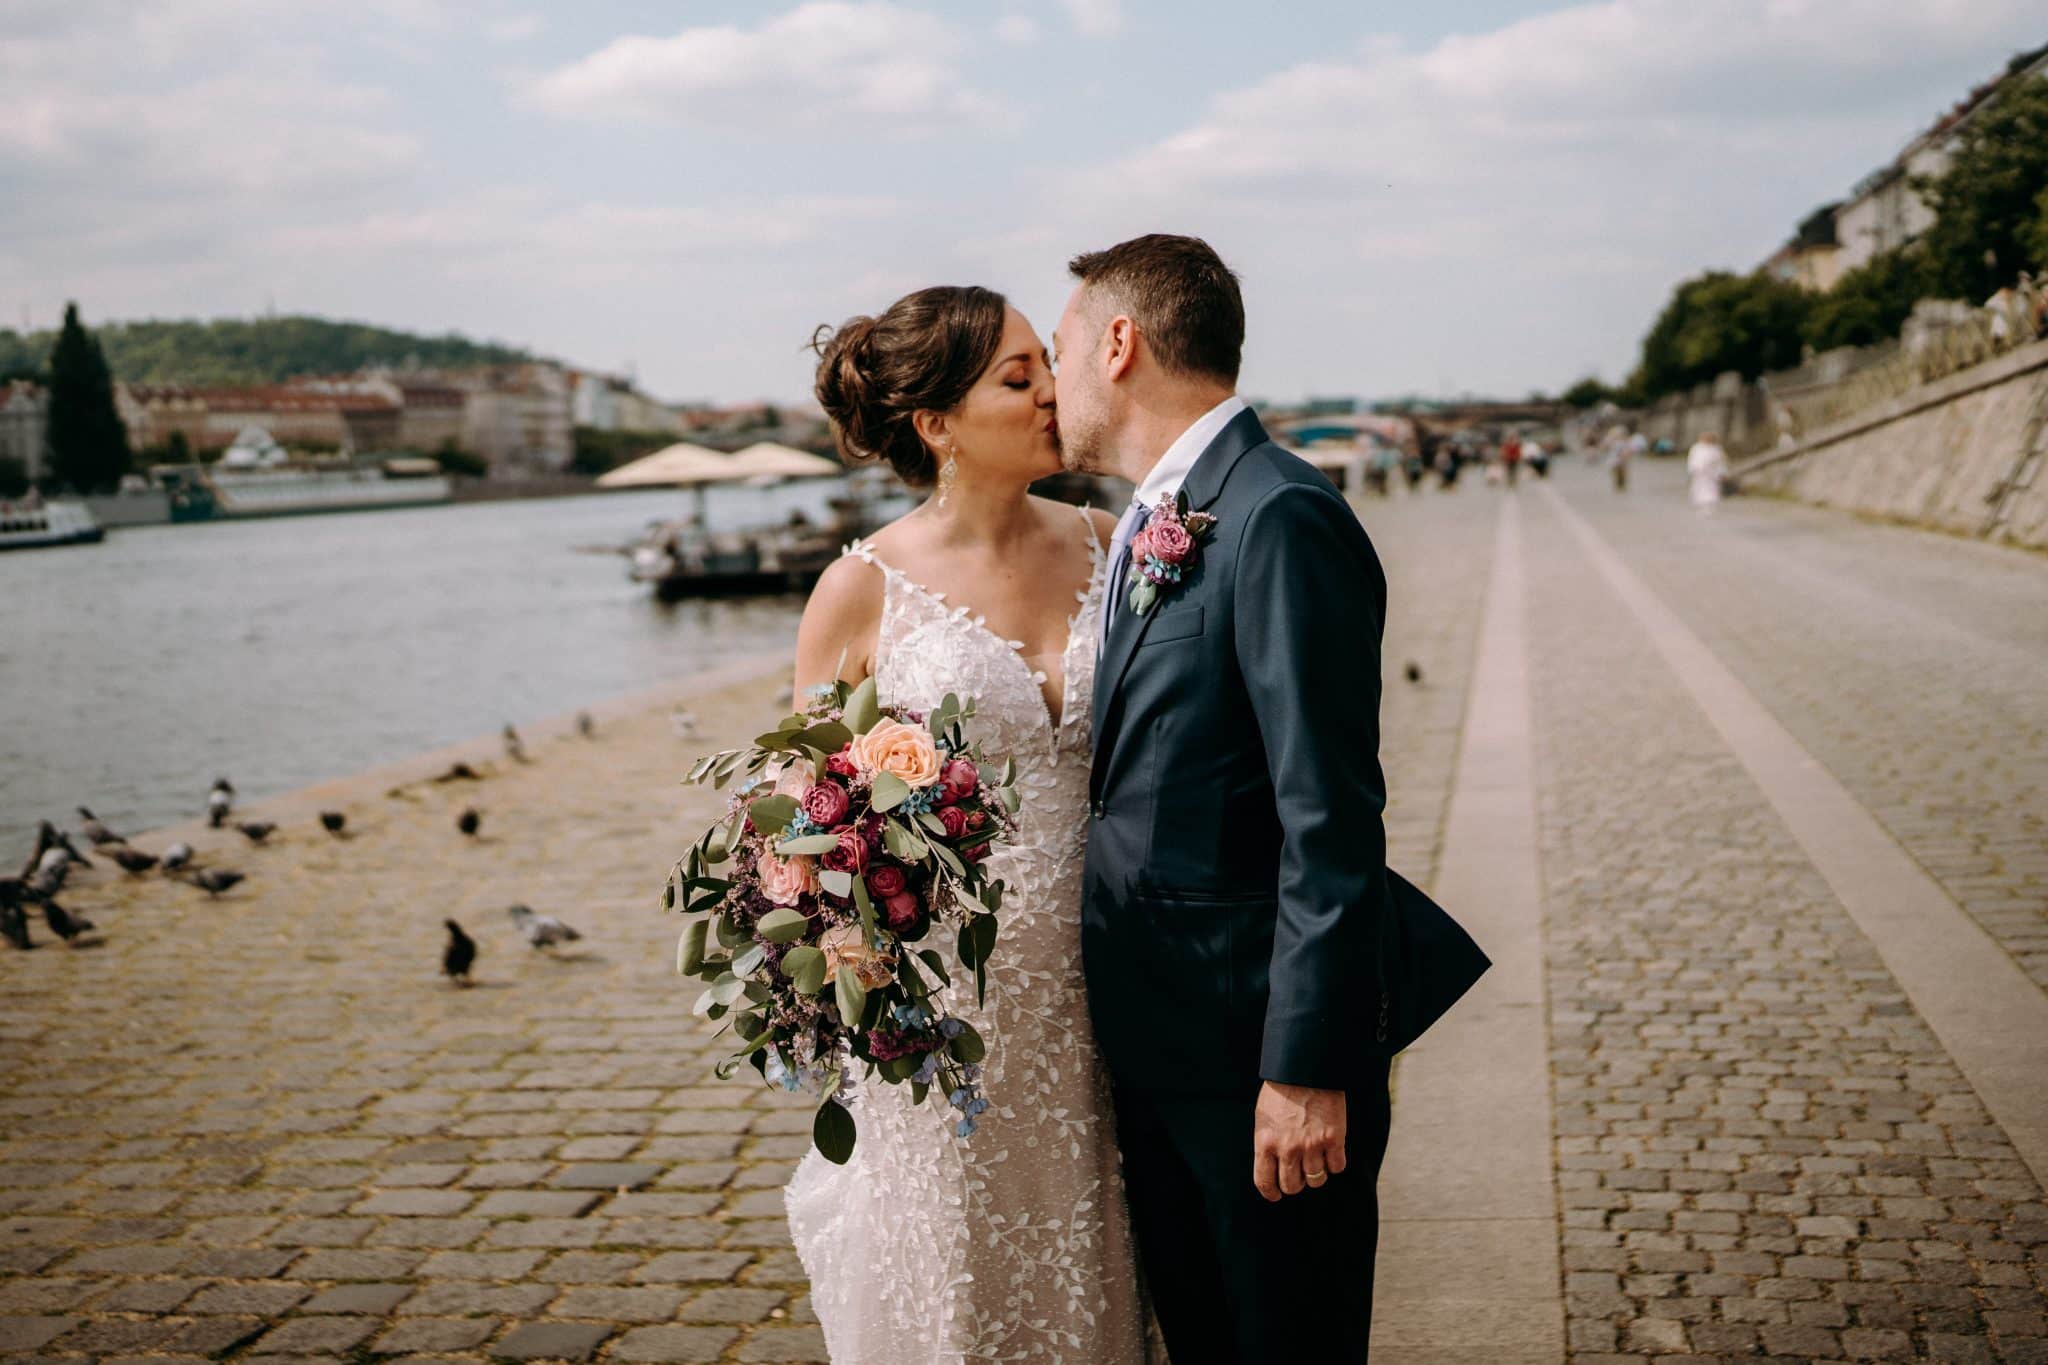 Kate and Charlie kissing on the banks of the river in Prague on their wedding day. Kate wears a white beaded dress with spaghetti straps, has her dark hair in a vintage-style updo, and Charlie wears a navy suit. Kate carries purple, pink, peach, and blue flowers.